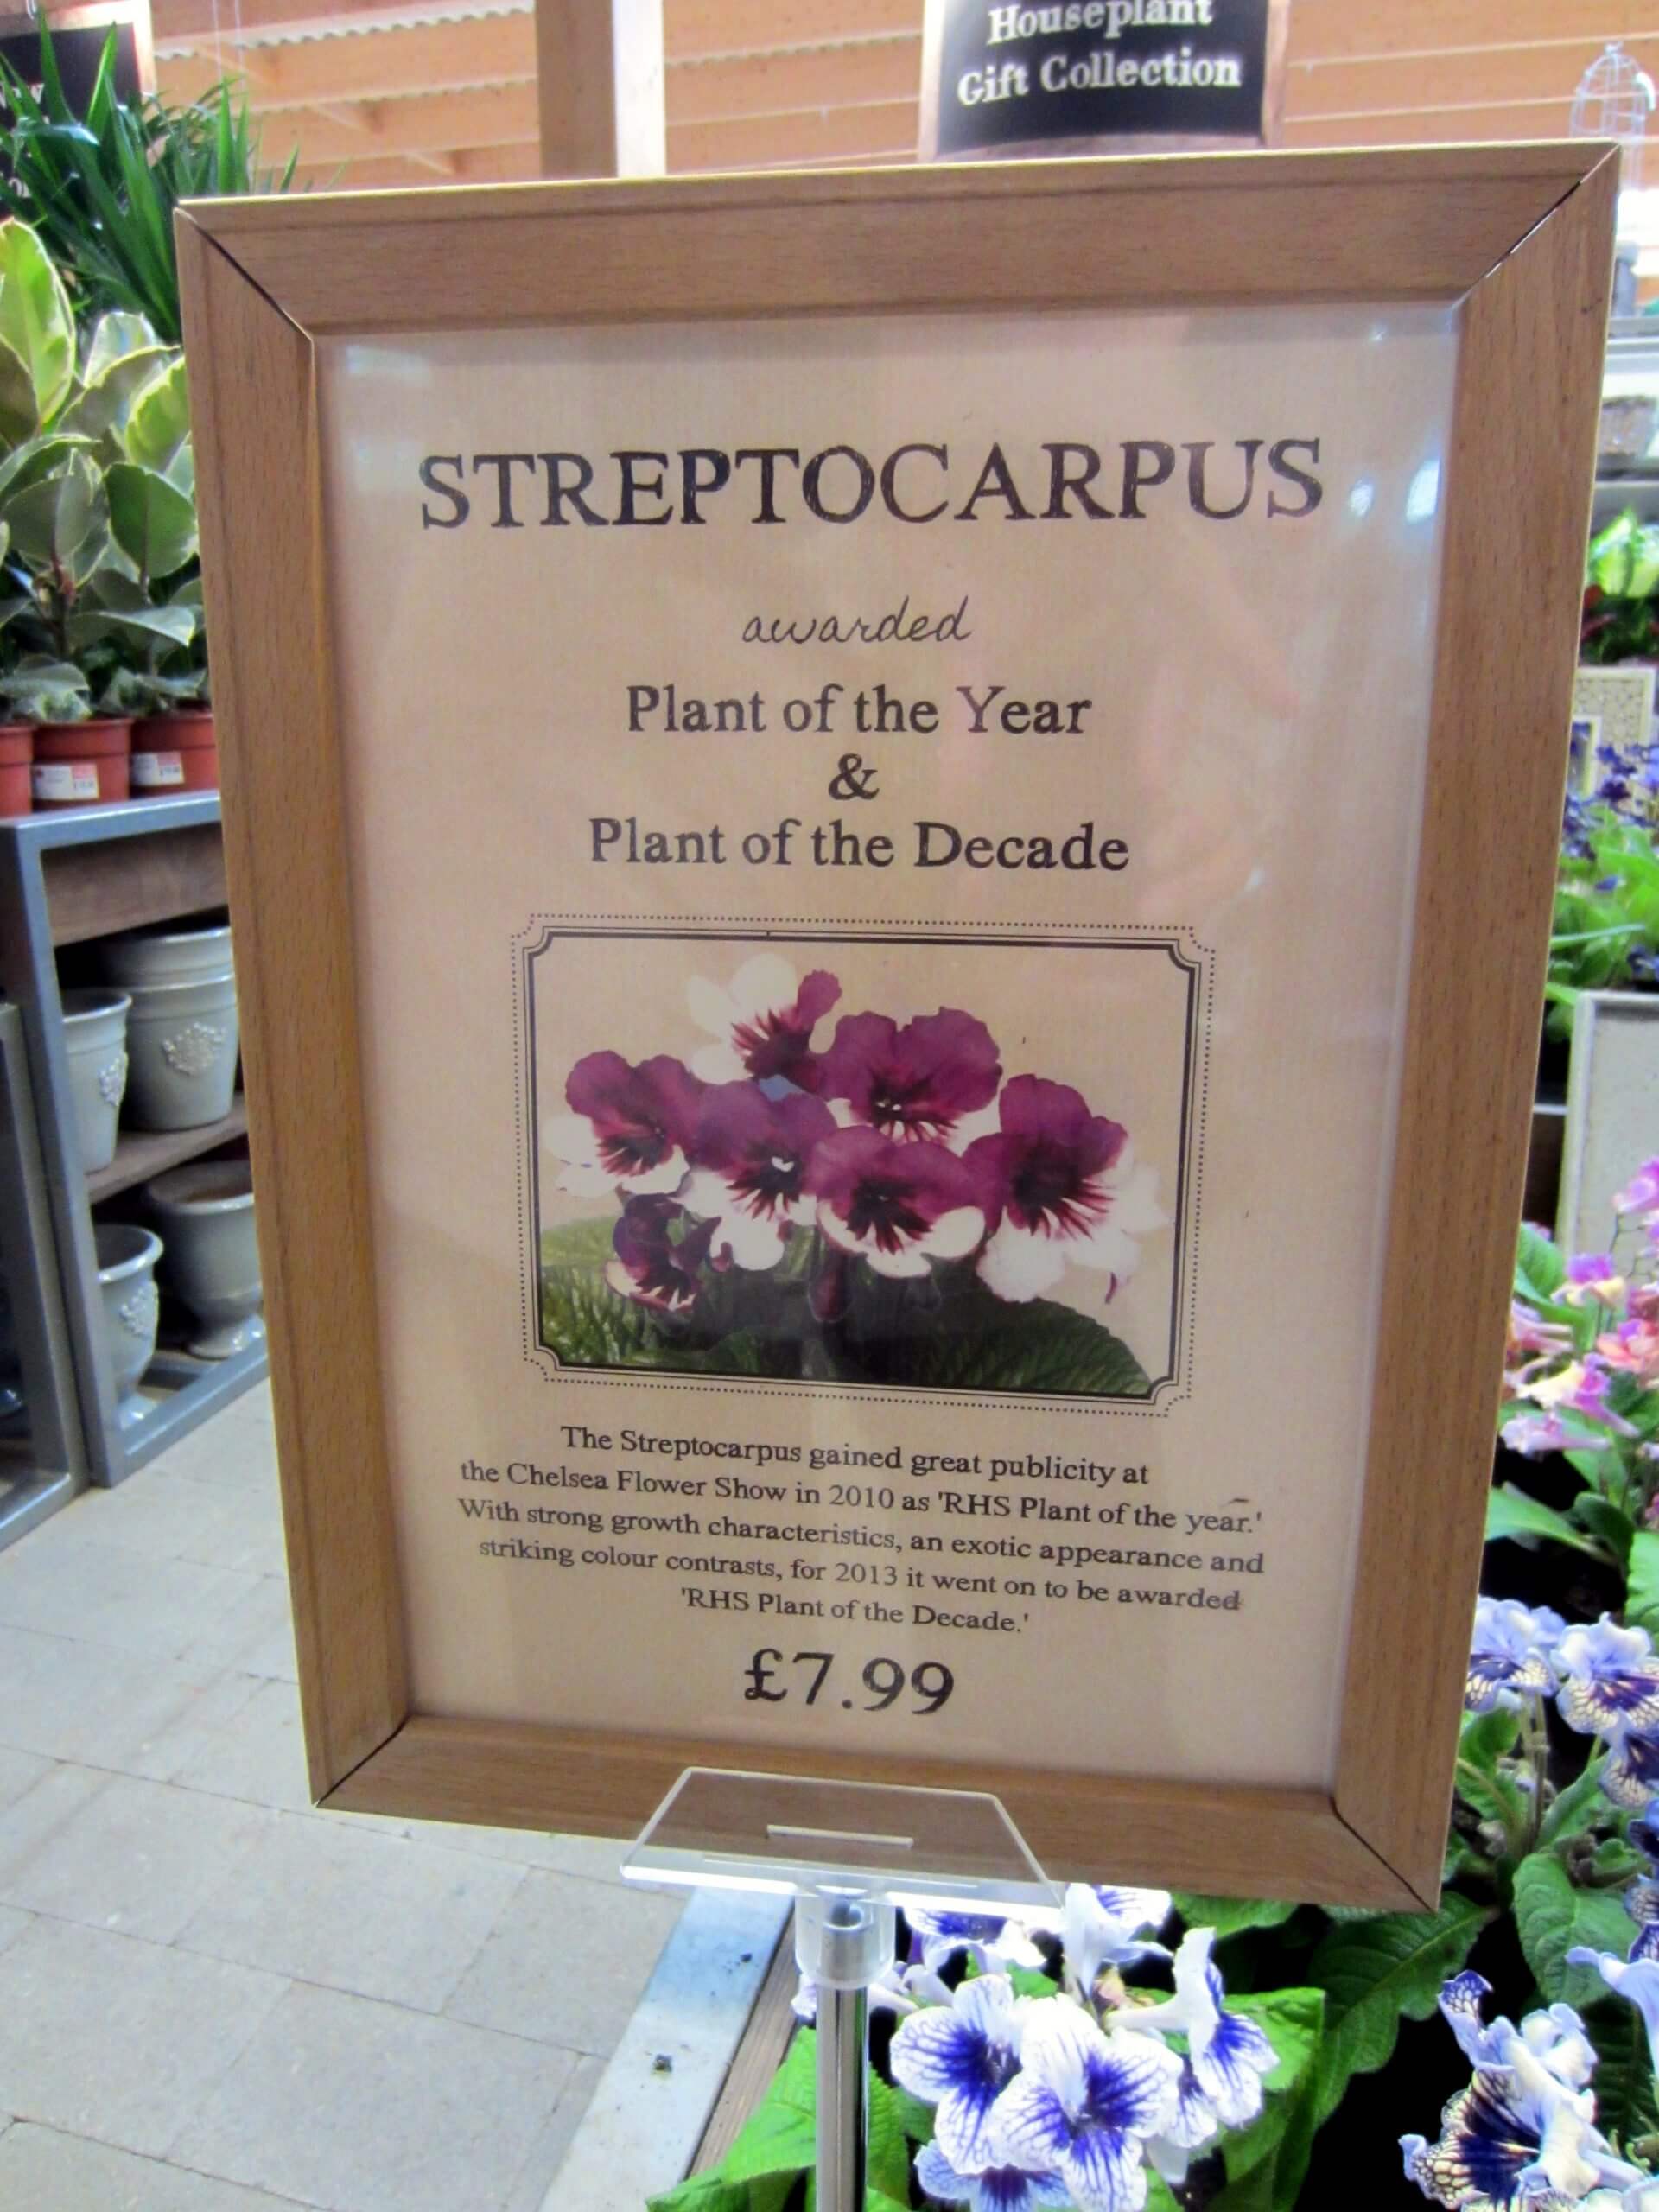 African violet relative, Streptocarpus, was named "Plant of the Decade" by the Royal Horticultural Society in the UK.